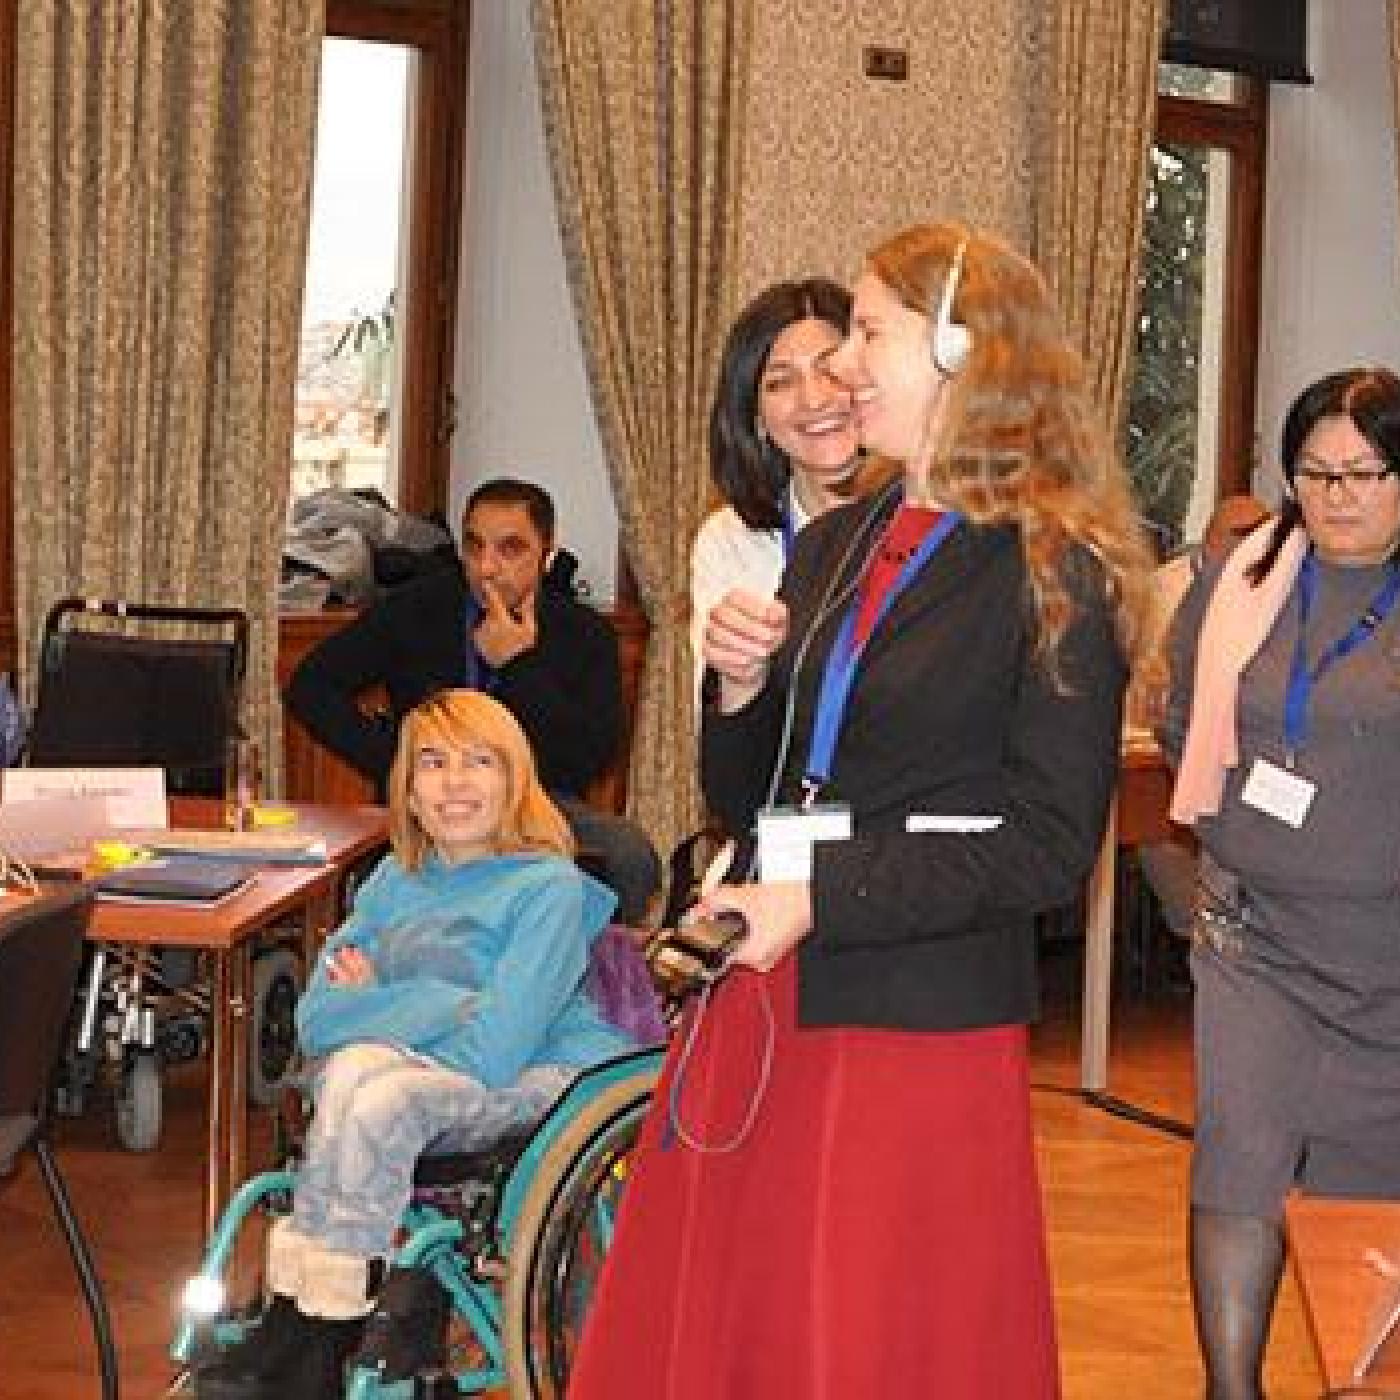 IFES Inclusion Advisor Virginia Atkinson leads a training for European disabled persons’ organizations to improve their advocacy and outreach skills.